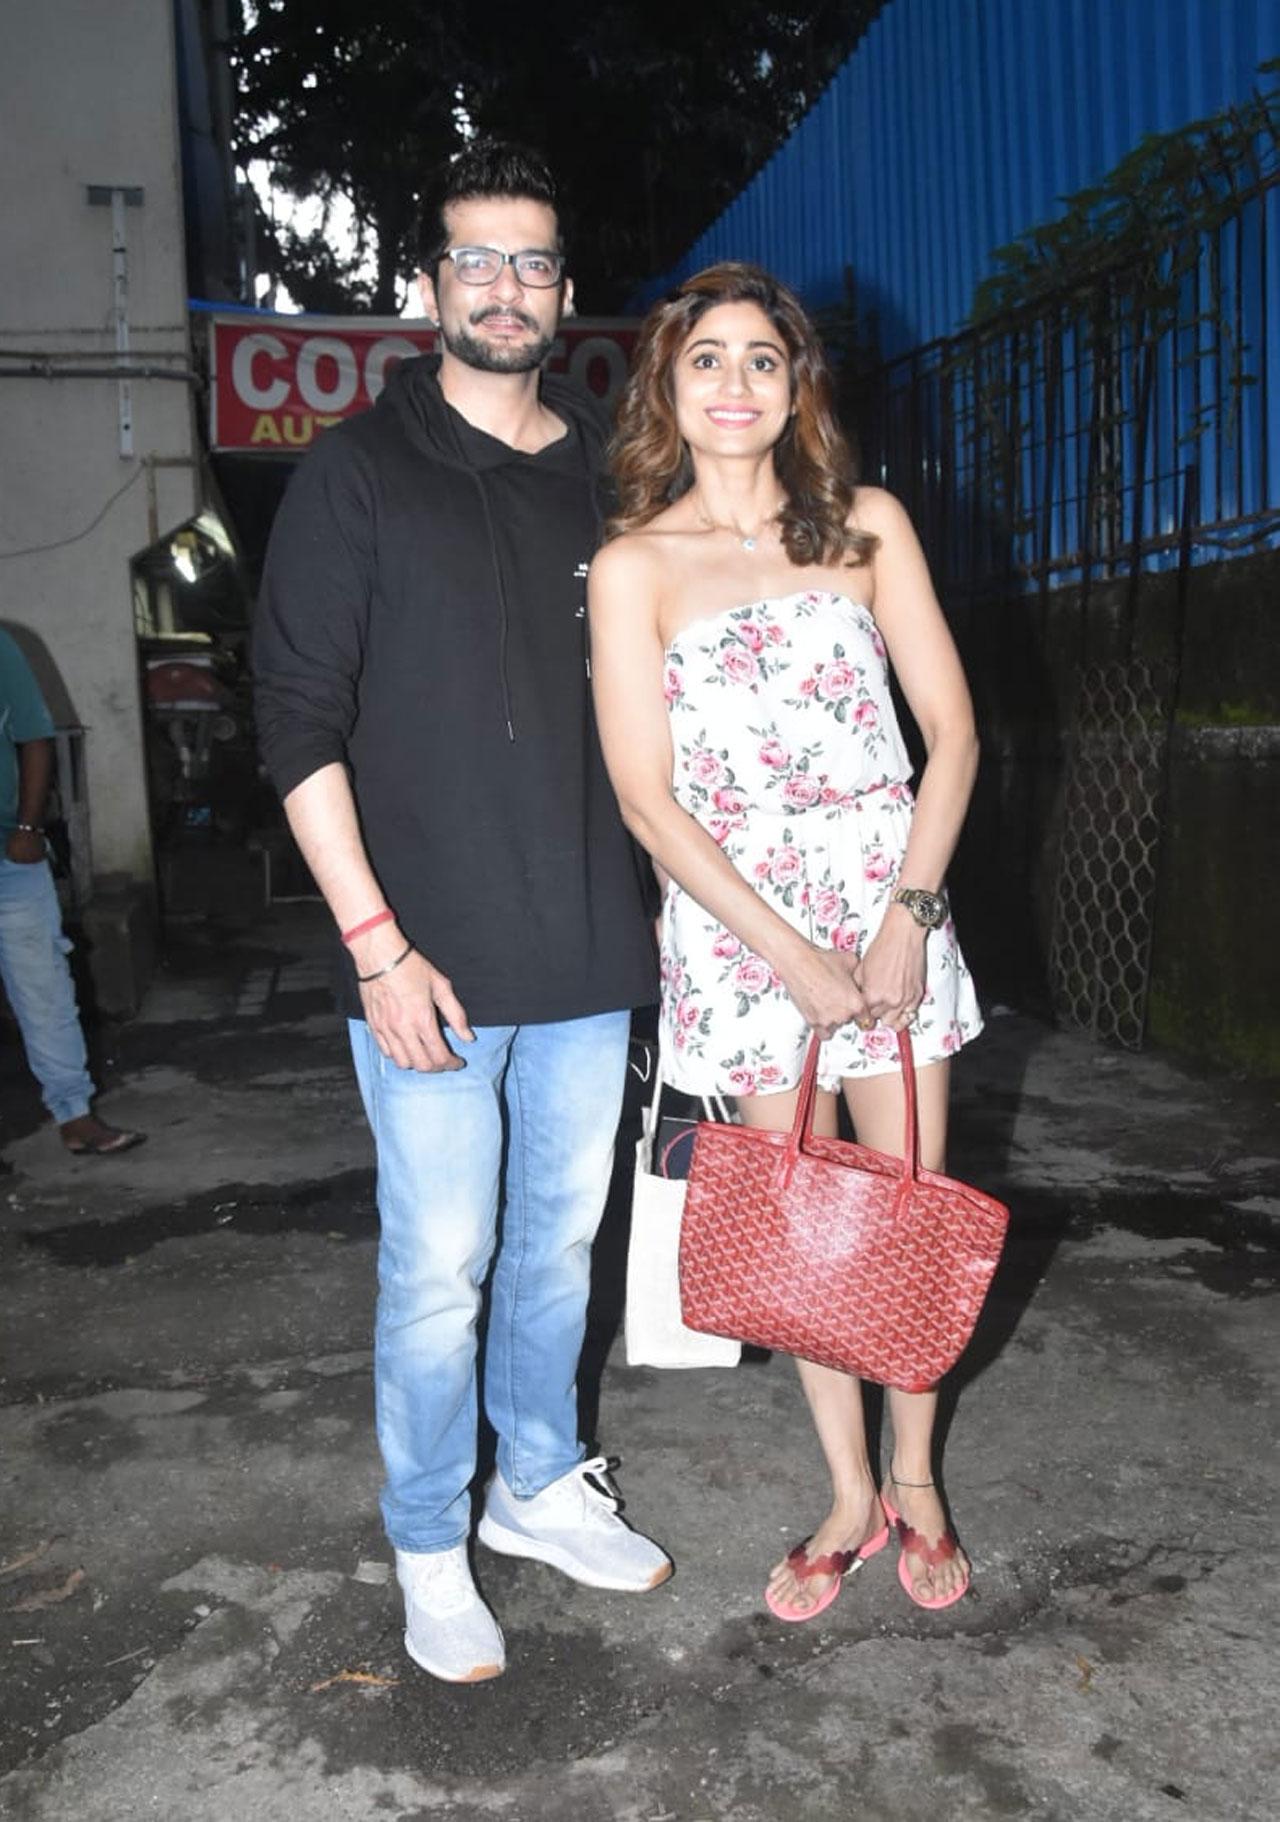 In an exclusive interview with mid-day.com, Raqesh spoke at length about his equation with Shamita Shetty. He said his chemistry with her was genuine.